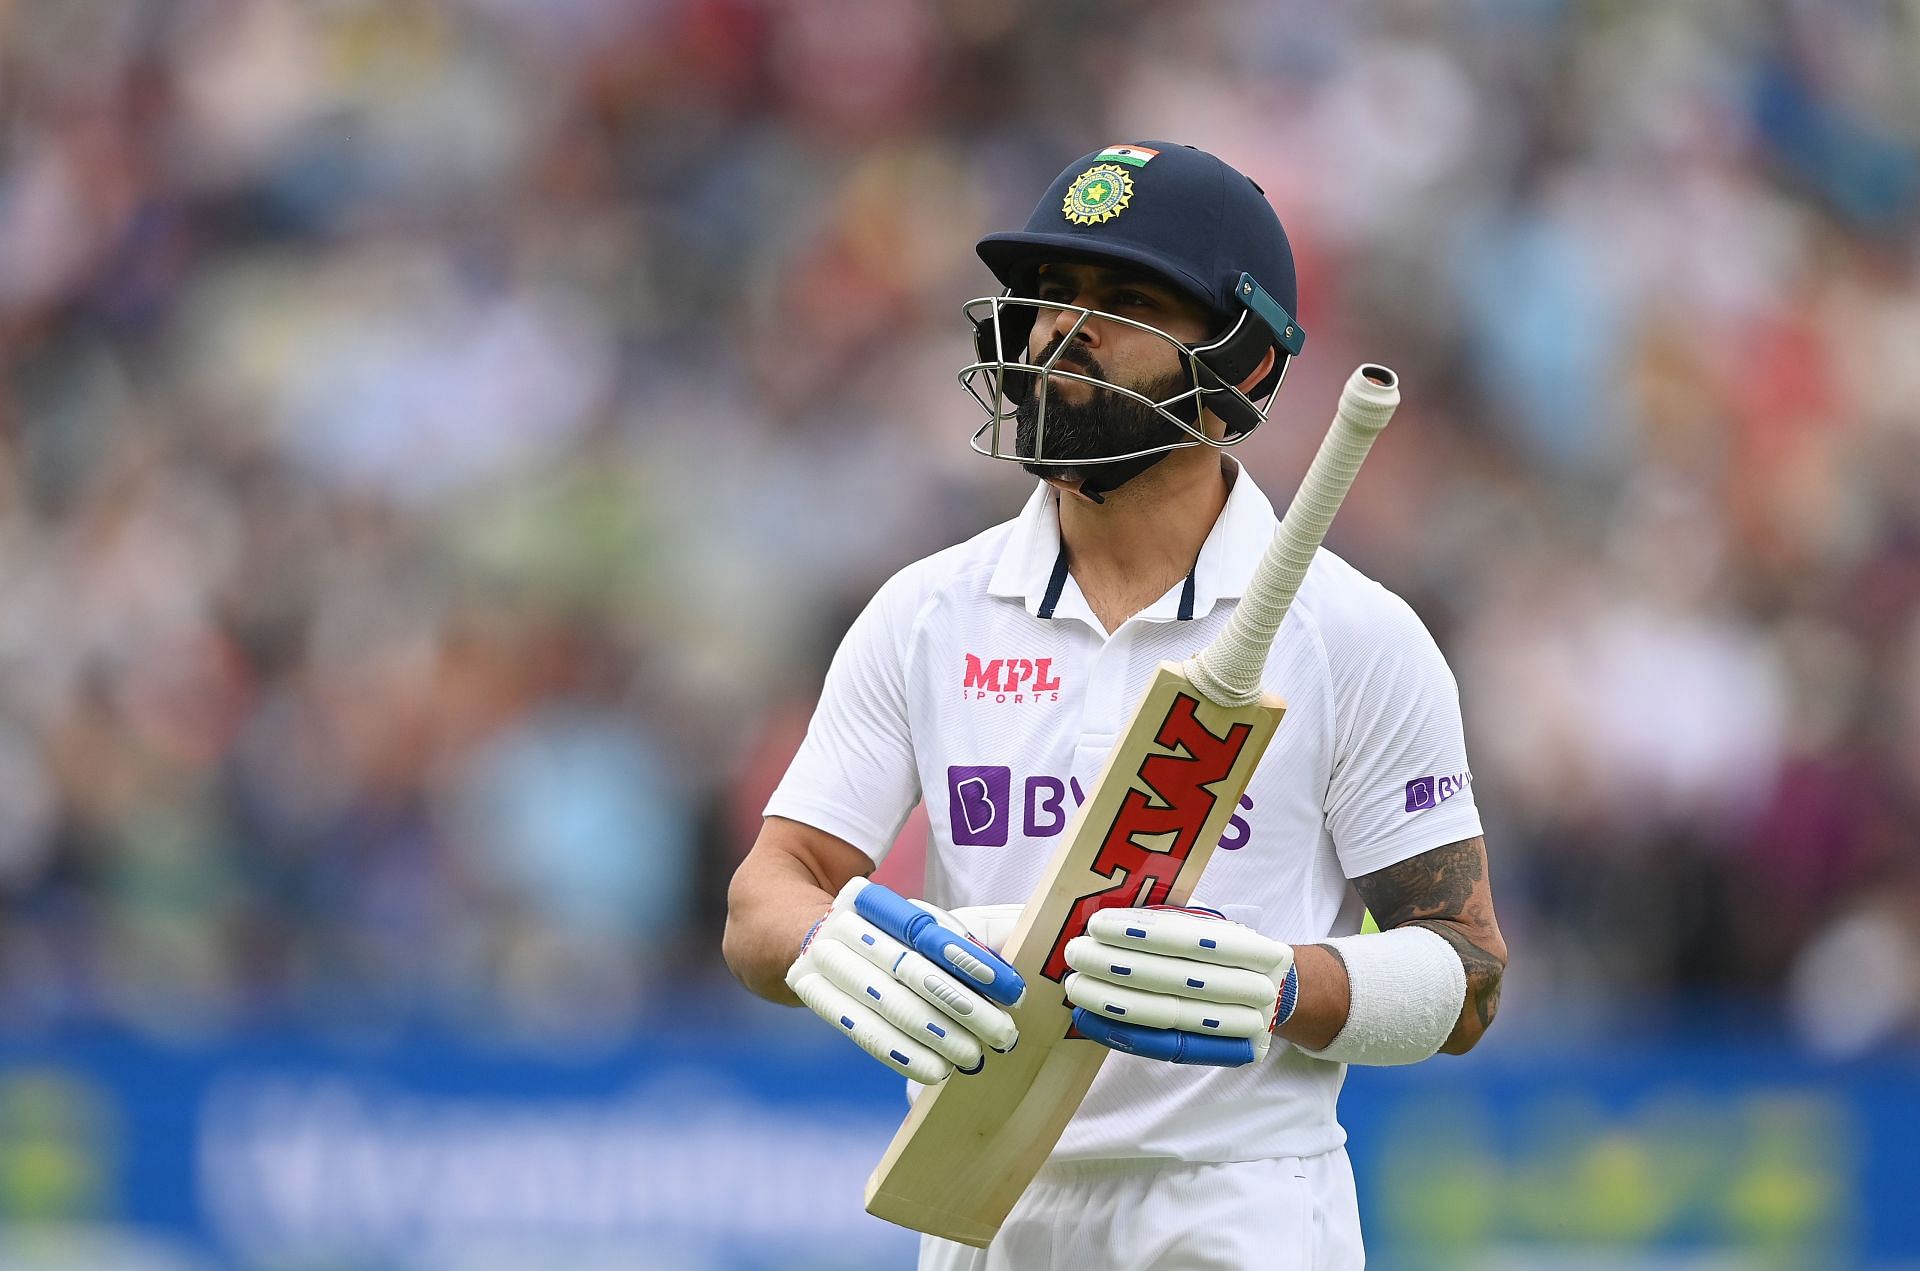 Virat Kohli failed to make a telling contribution in the one-off Test